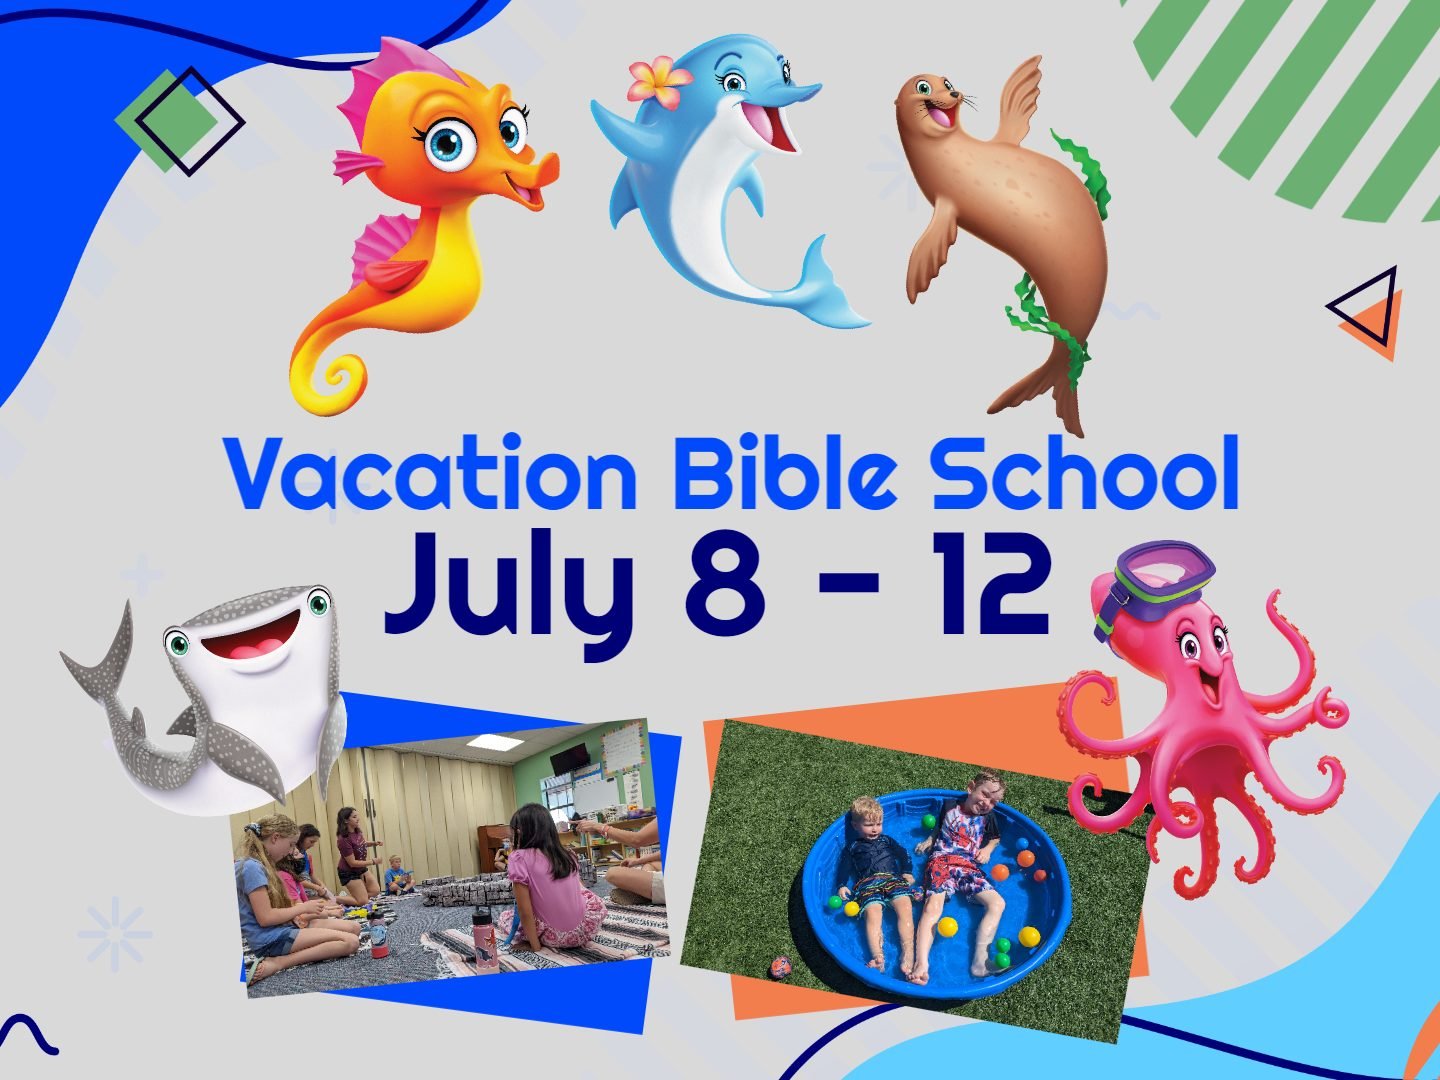 Dive into Friendship with God at SCUBA Vacation Bible School!

VBS is a new week this year! Join us from July 8-12, 9:00 AM - 12:15 PM, for an unforgettable week at SCUBA VBS! Registration is OPEN for children PreK through 6th grade. Experience an un